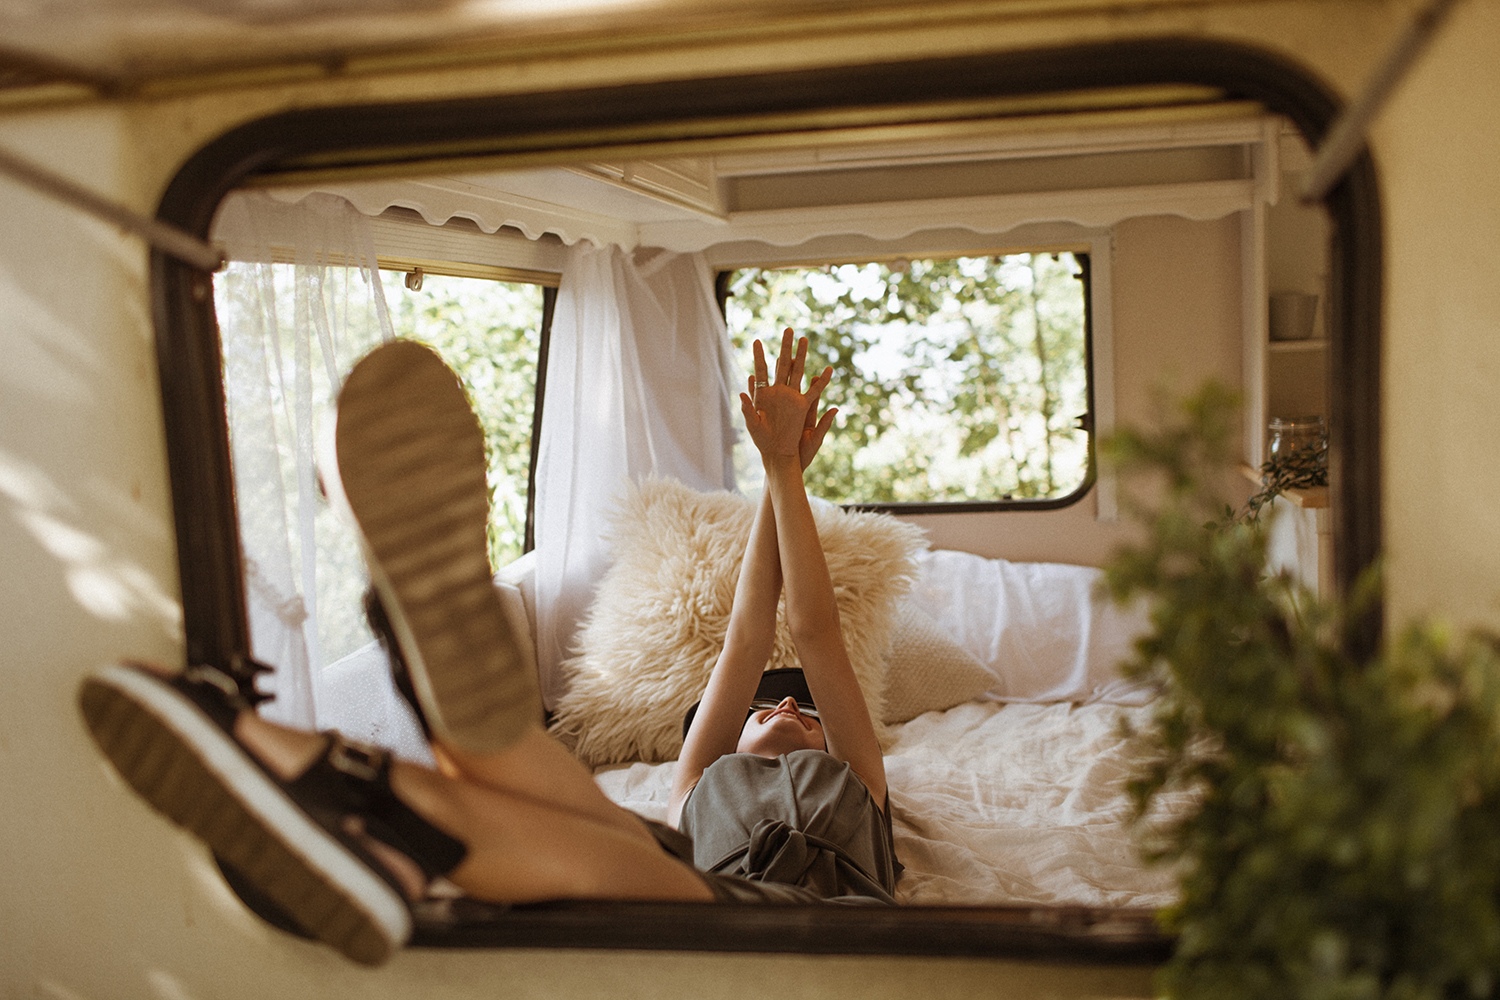 People 1500x1000 women model smiling sandals arms up women with hats women with shades dress in bed lying on back caravan